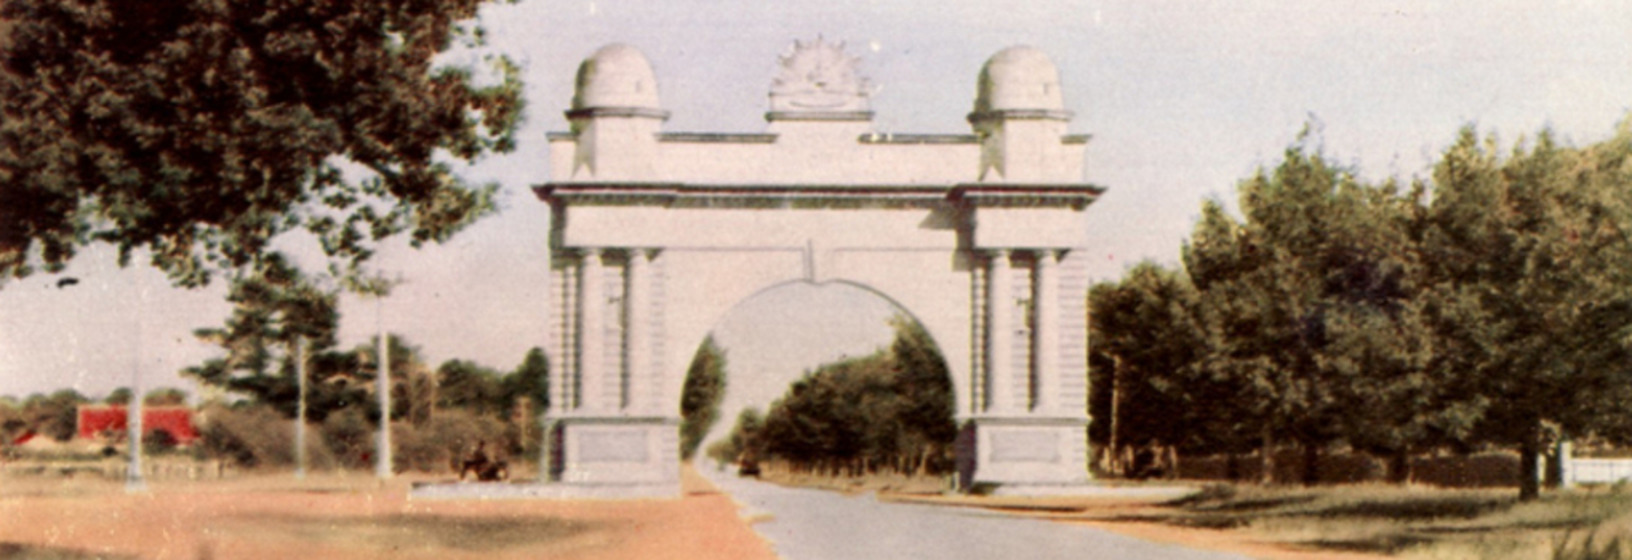 a grand arch reaches over a tree-lined road